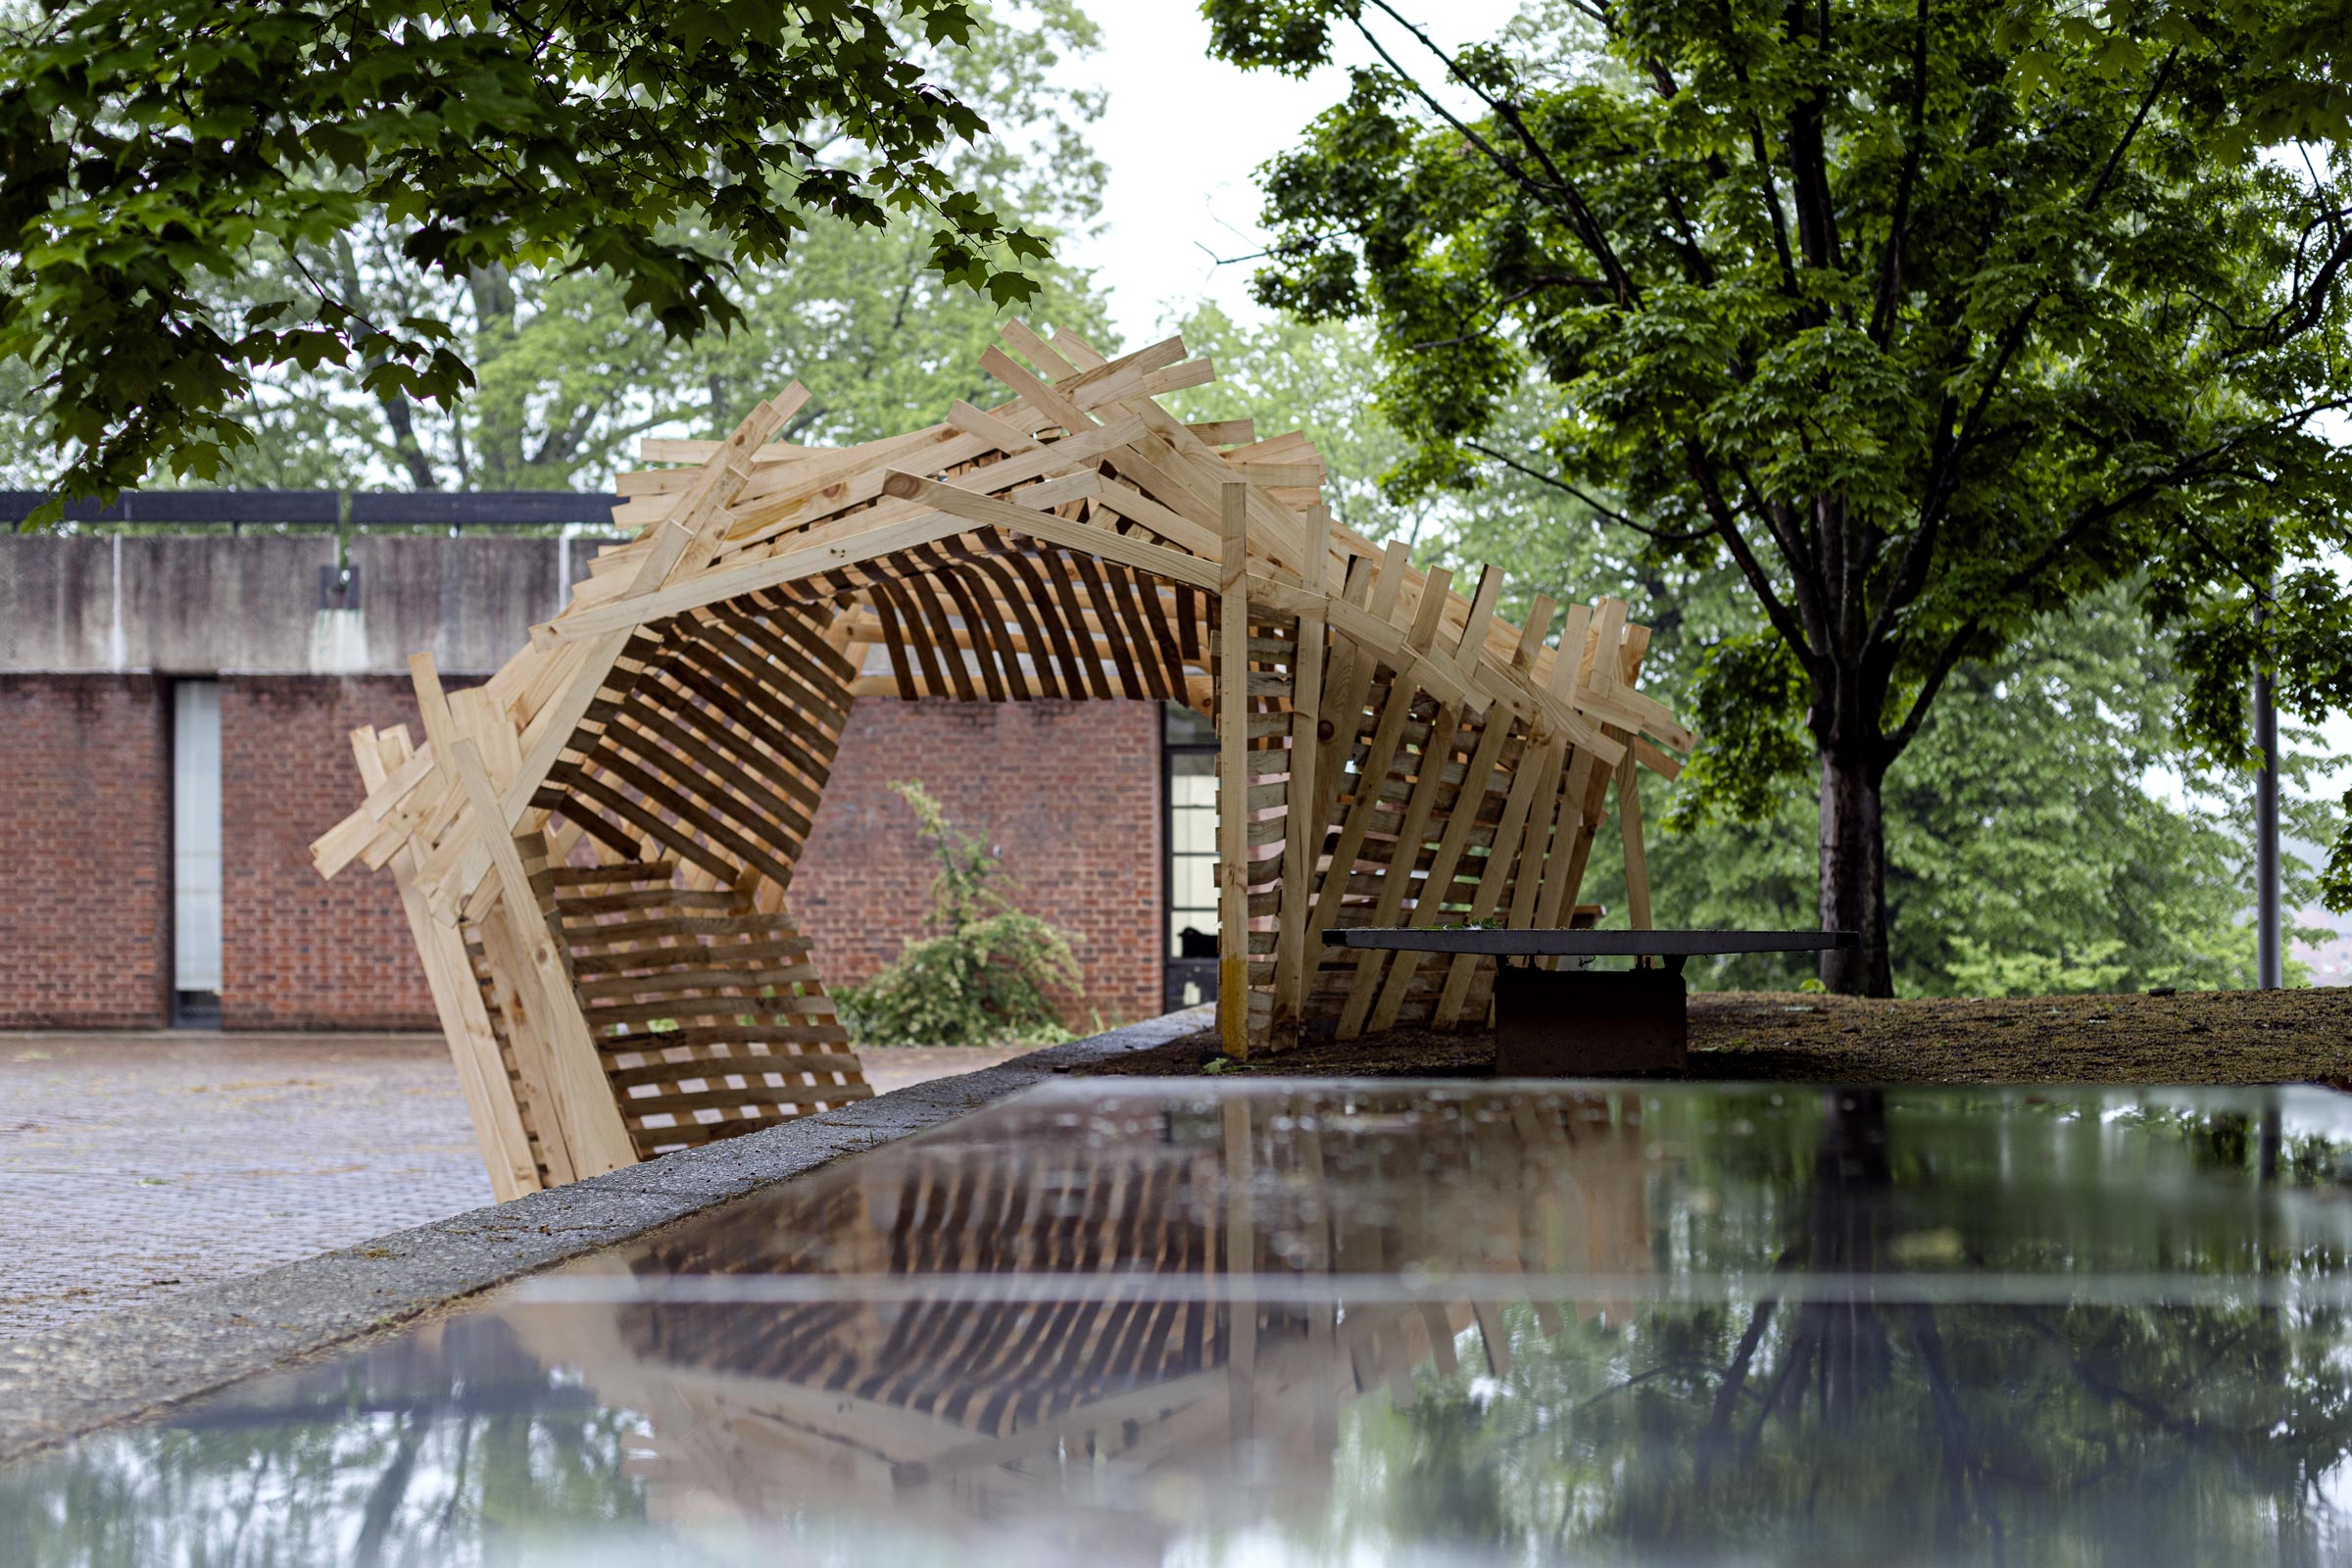 A wooden structure built by Architecture students on the north terrace